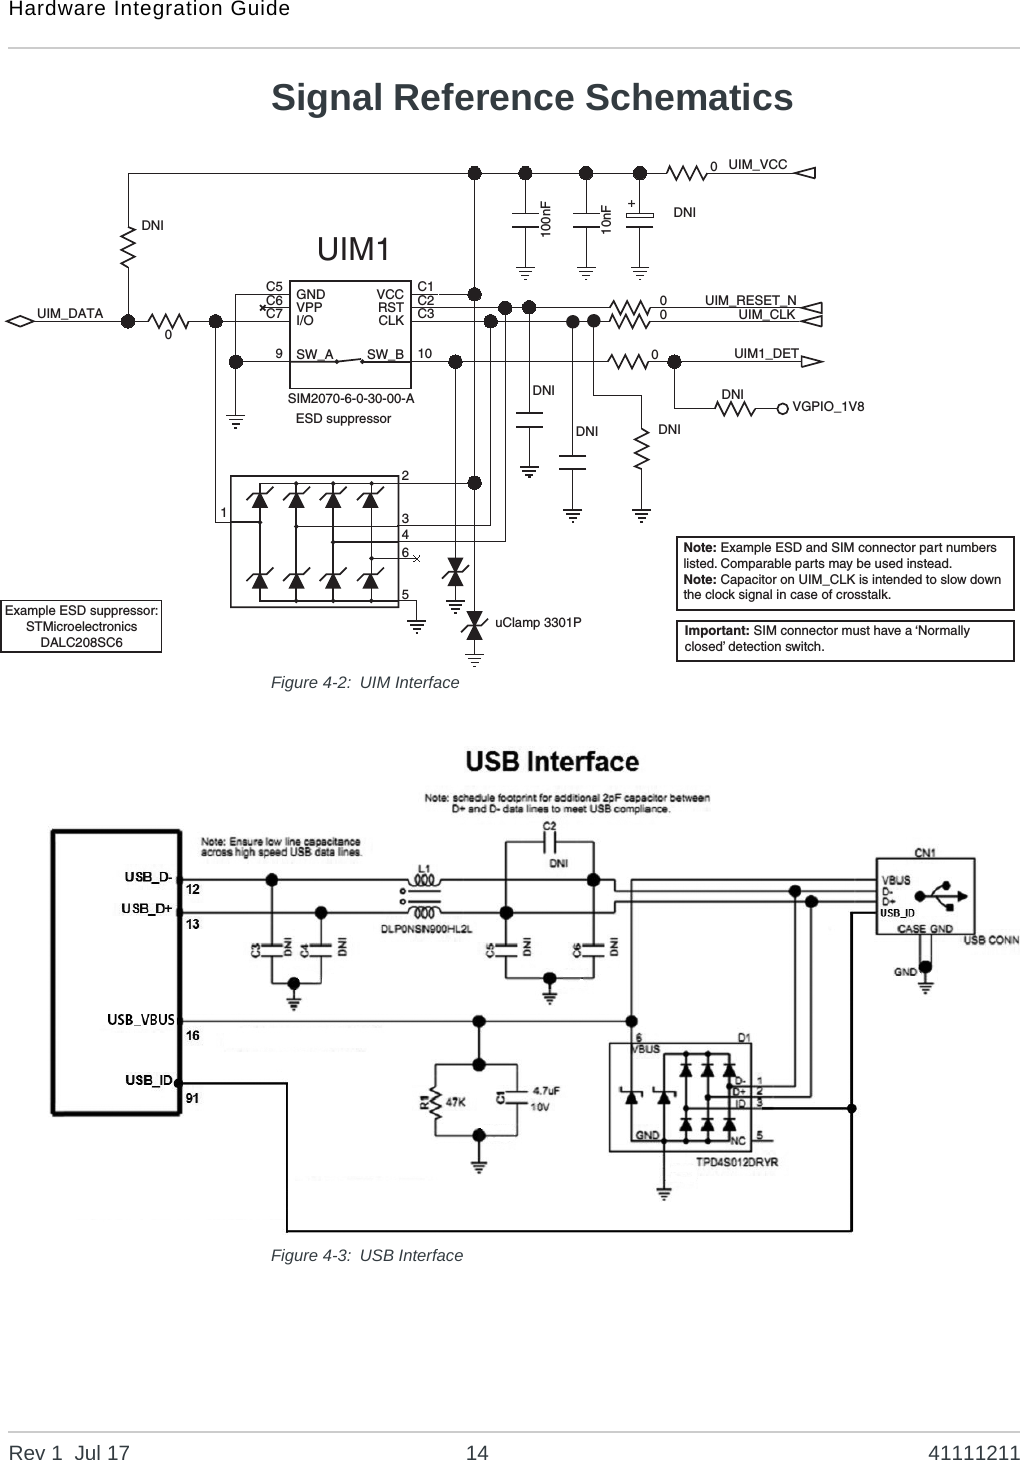 Hardware Integration GuideRev 1  Jul 17 14 41111211Signal Reference SchematicsFigure 4-2: UIM InterfaceFigure 4-3: USB Interface000010nF0100nF10C3C2C19C7C6C5 GNDVPPI/OSW_AVCCRSTCLKSW_BDNIDNIDNIVGPIO_1V8UIM_RESET_NUIM_DATA UIM_CLKUIM_VCCUIM1_DETUIM1DNISIM2070-6-0-30-00-AESD suppressorNote: Example ESD and SIM connector part numbers listed. Comparable parts may be used instead.Note: Capacitor on UIM_CLK is intended to slow down the clock signal in case of crosstalk.DNIDNIExample ESD suppressor:STMicroelectronicsDALC208SC6           +uClamp 3301P123465Important: SIM connector must have a ‘Normally closed’ detection switch.